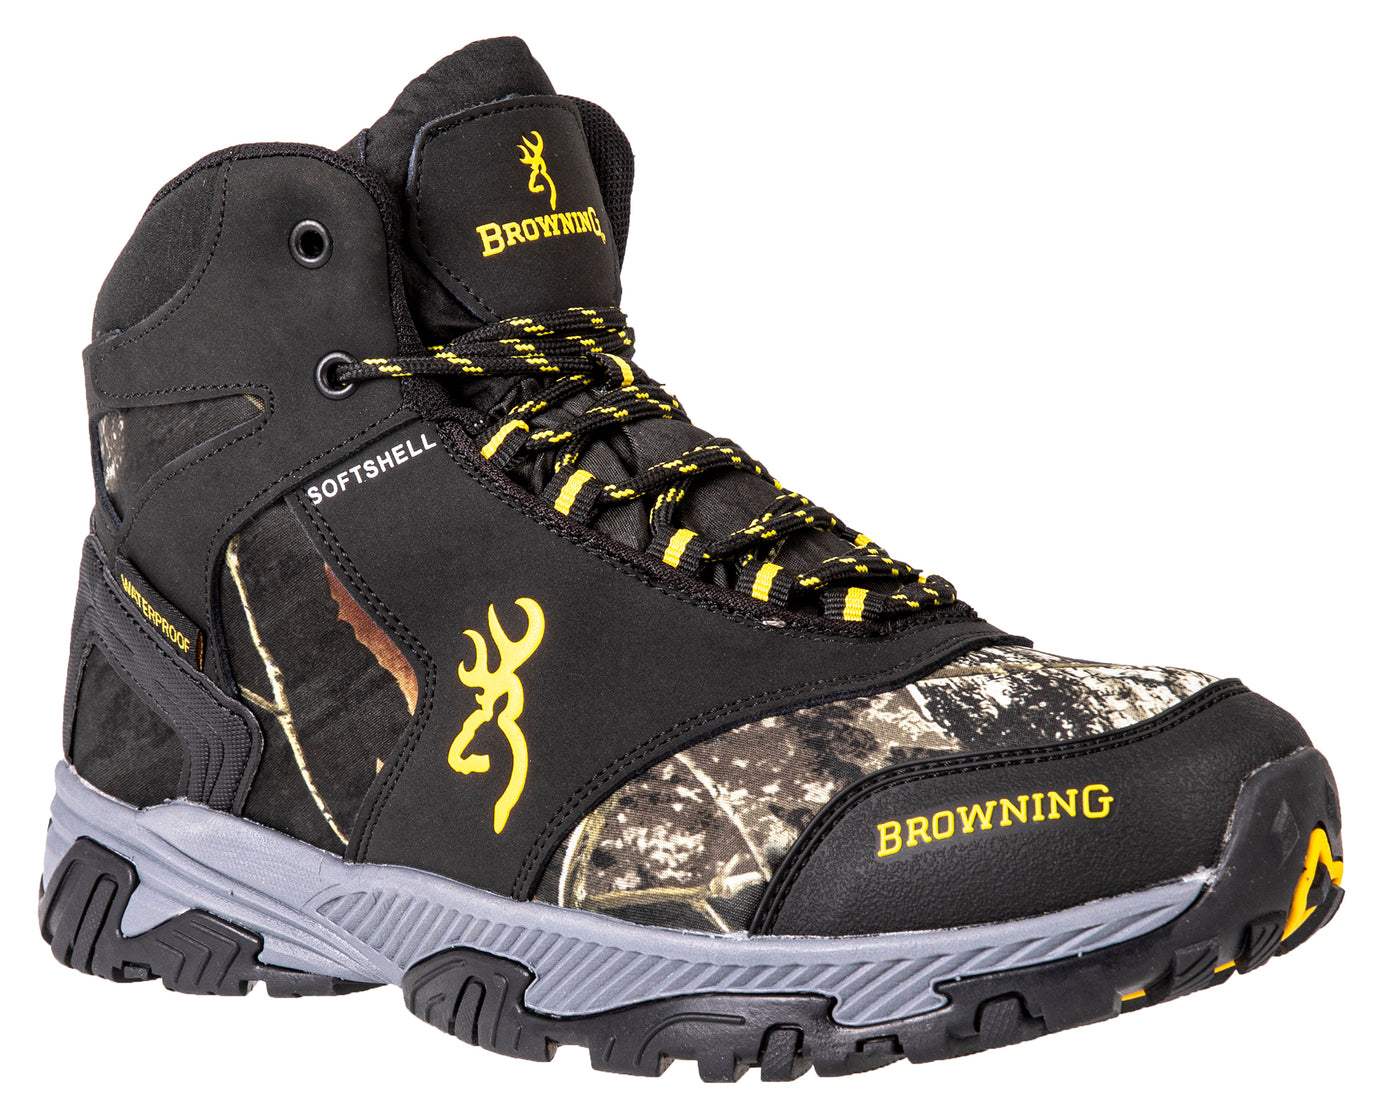 Men's "Plainsman" Waterproof Hunting and Outdoor Boots Browning